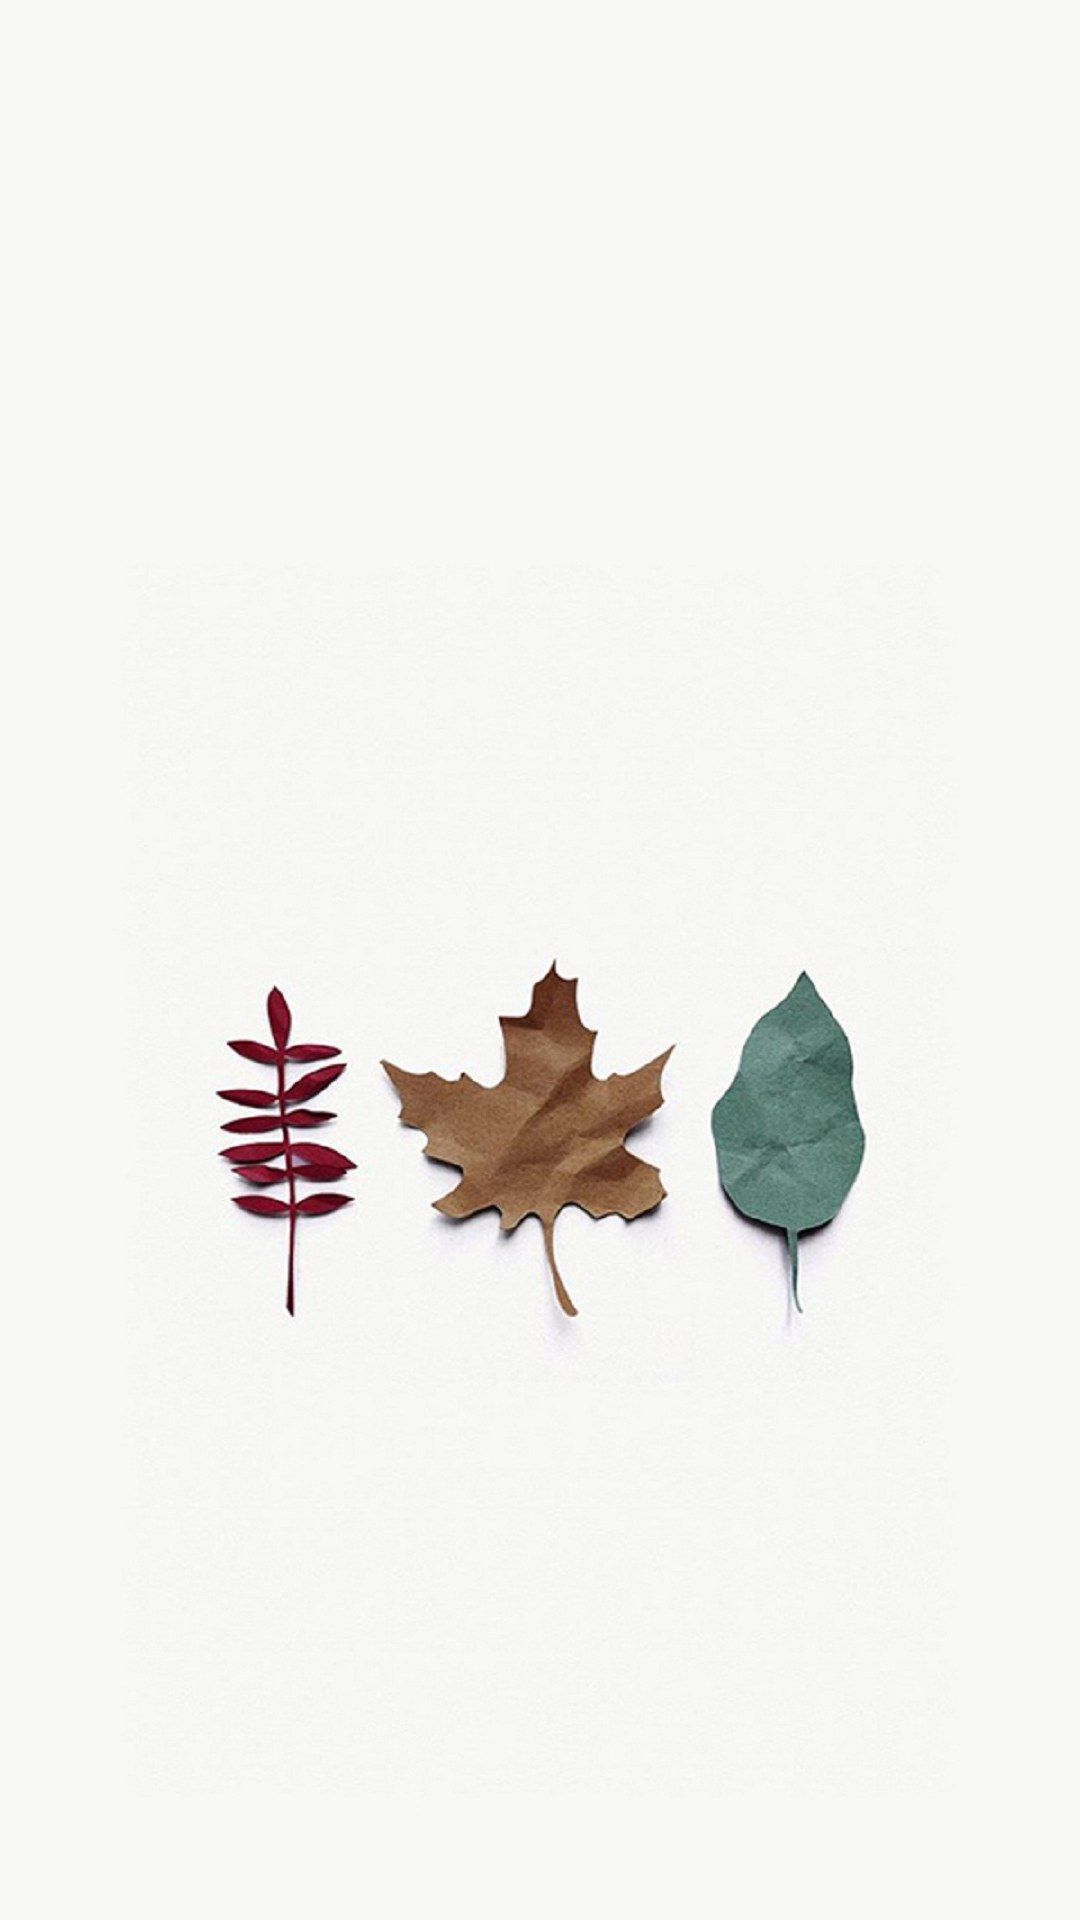 Various Paper Leaves. Fall wallpaper, Best iphone wallpaper, Fall background iphone